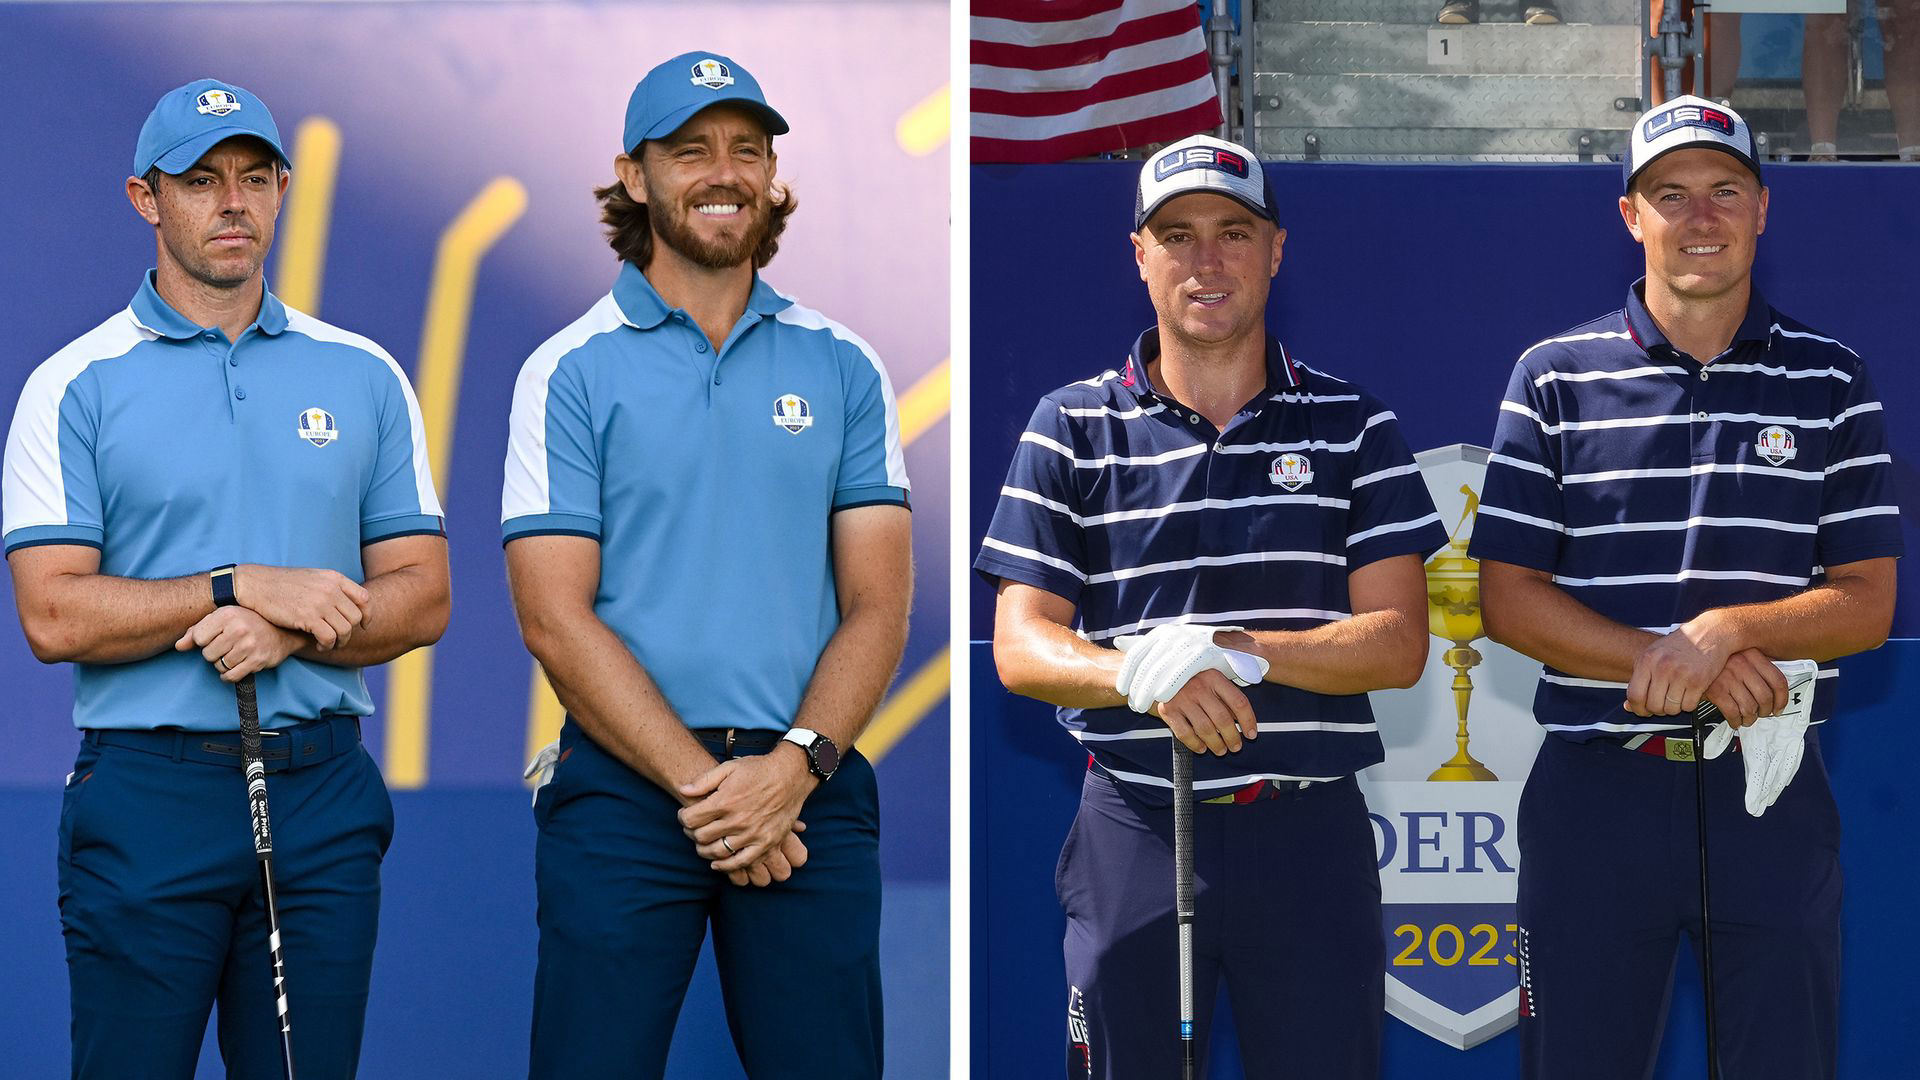 Ryder Cup Day 2 Pairings McIlroy/Fleetwood vs Spieth/Thomas First Match